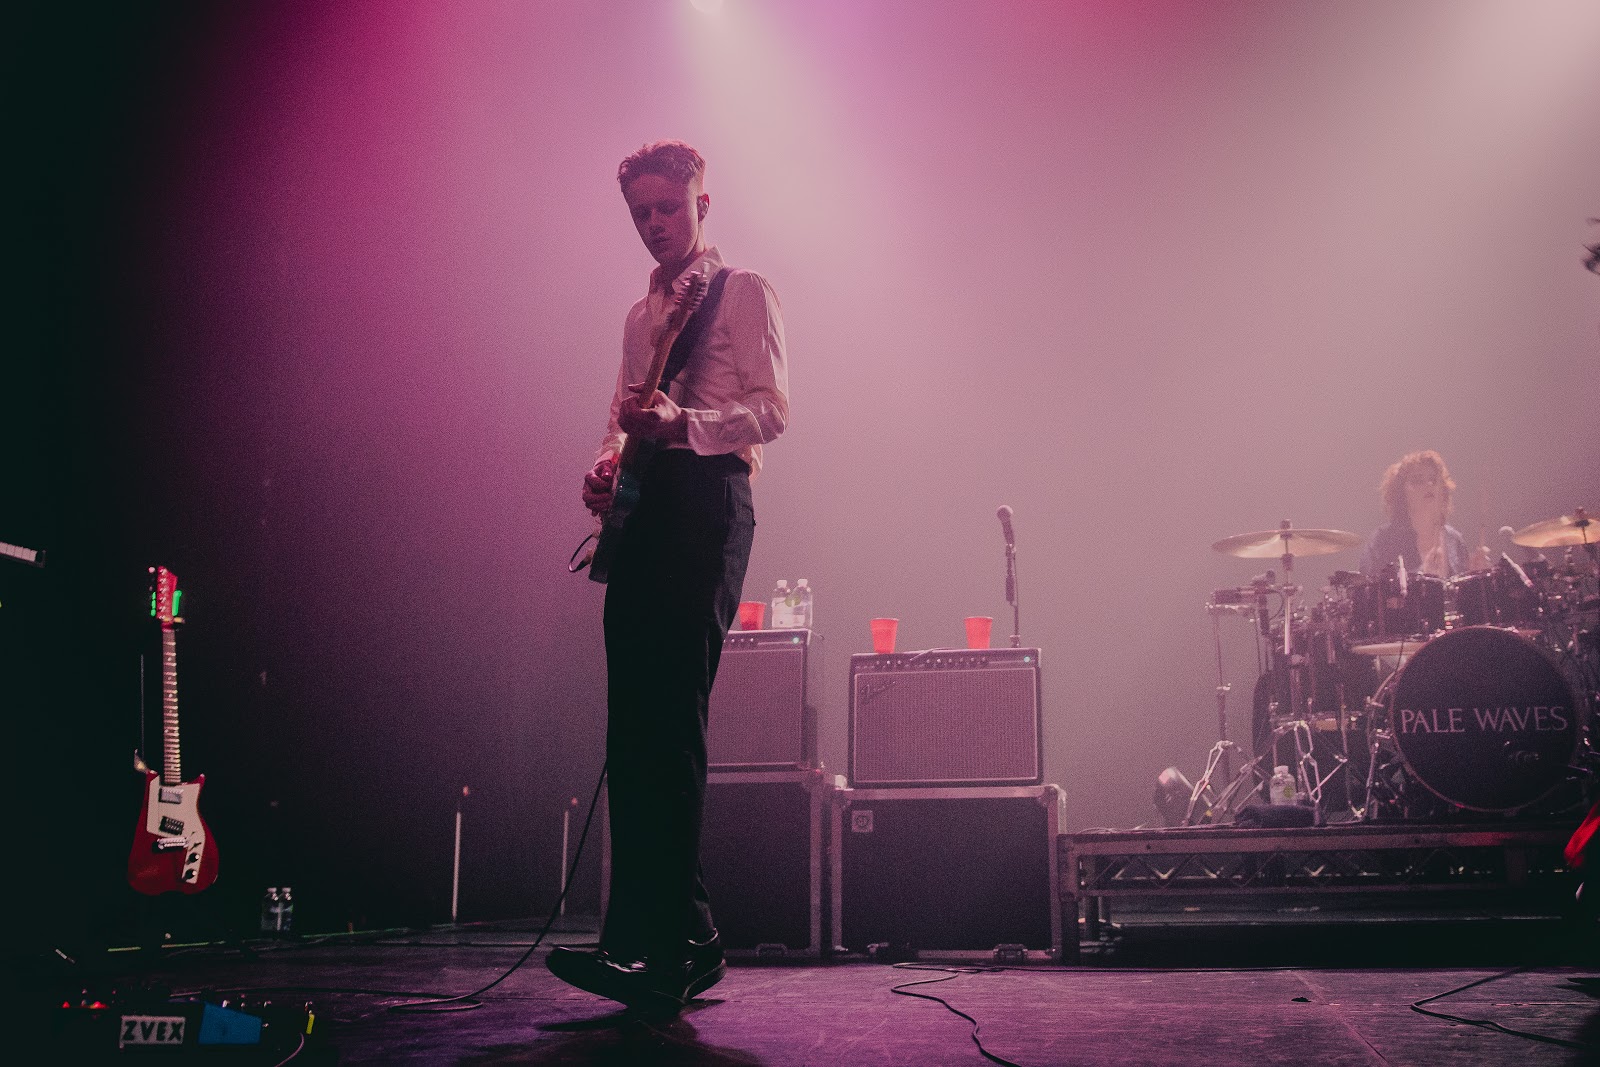 Pale Waves Live at The Fonda Theatre, Los Angeles 2018 © Caitlin Ison